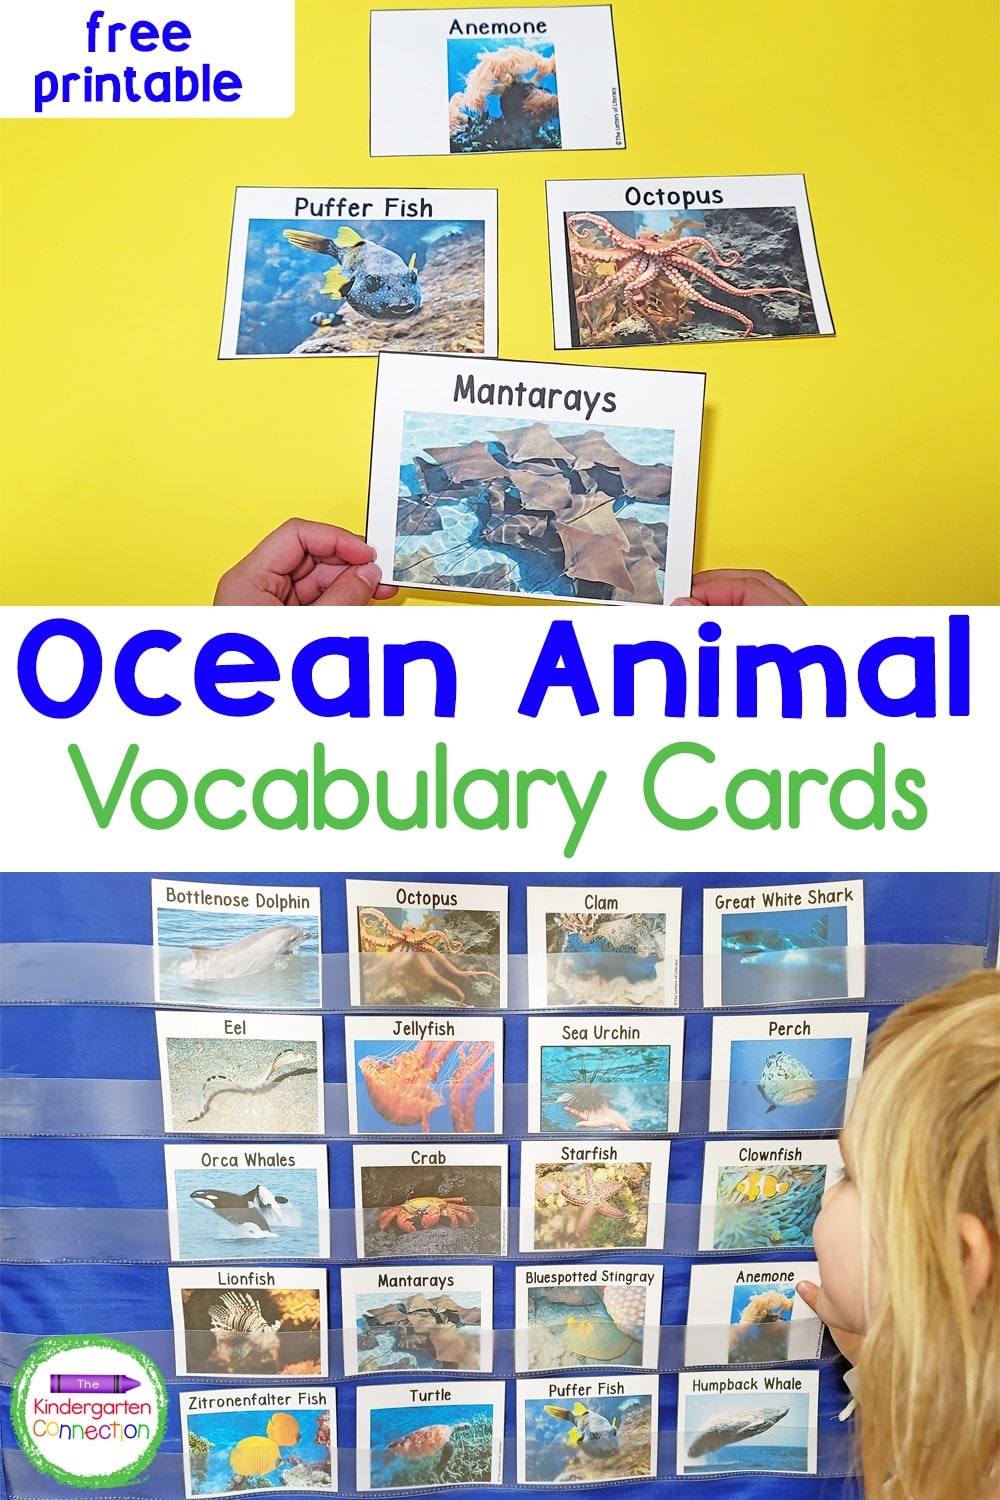 Learn about ocean animals and build up vocabulary with these free Ocean Animal Vocabulary Cards for Kindergarten!